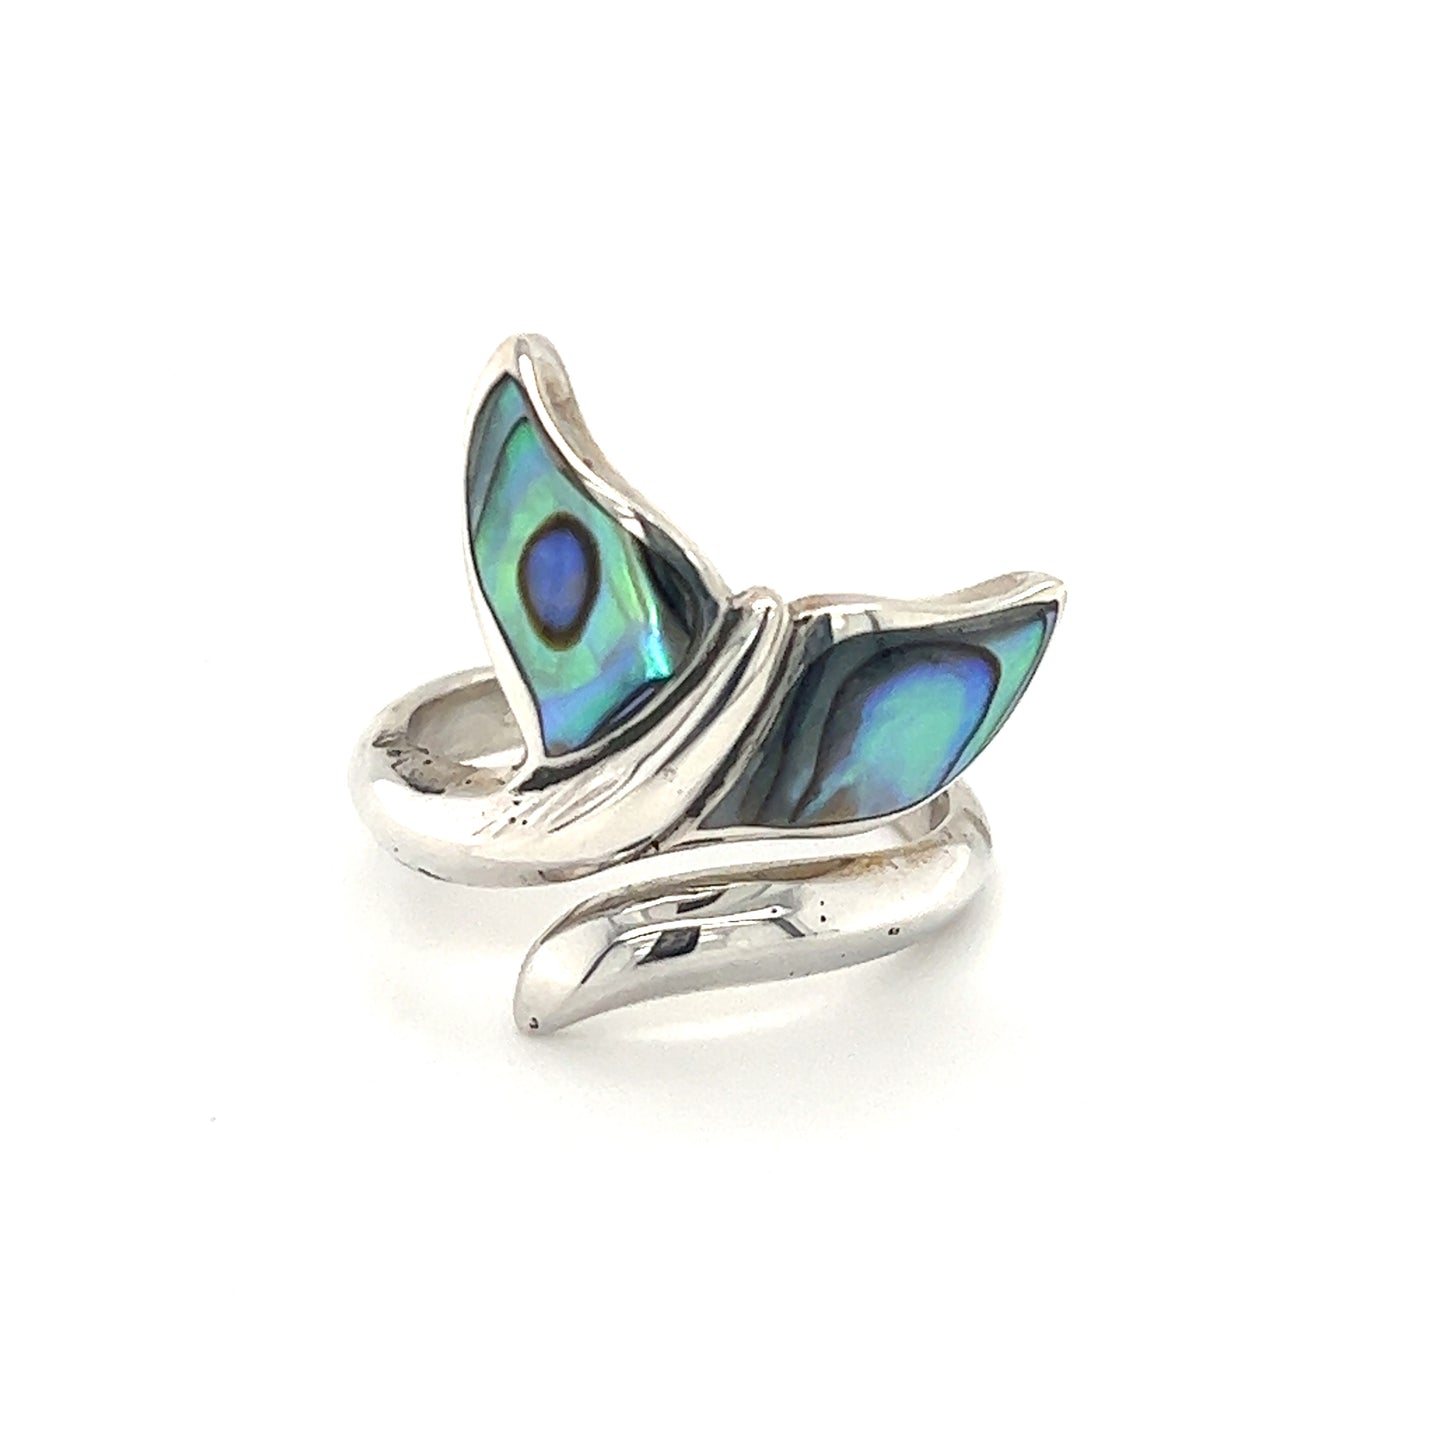 A Refreshing Adjustable Abalone Whale Tail Ring adorned with an abalone shell, reminiscent of the ocean's vibrant colors.